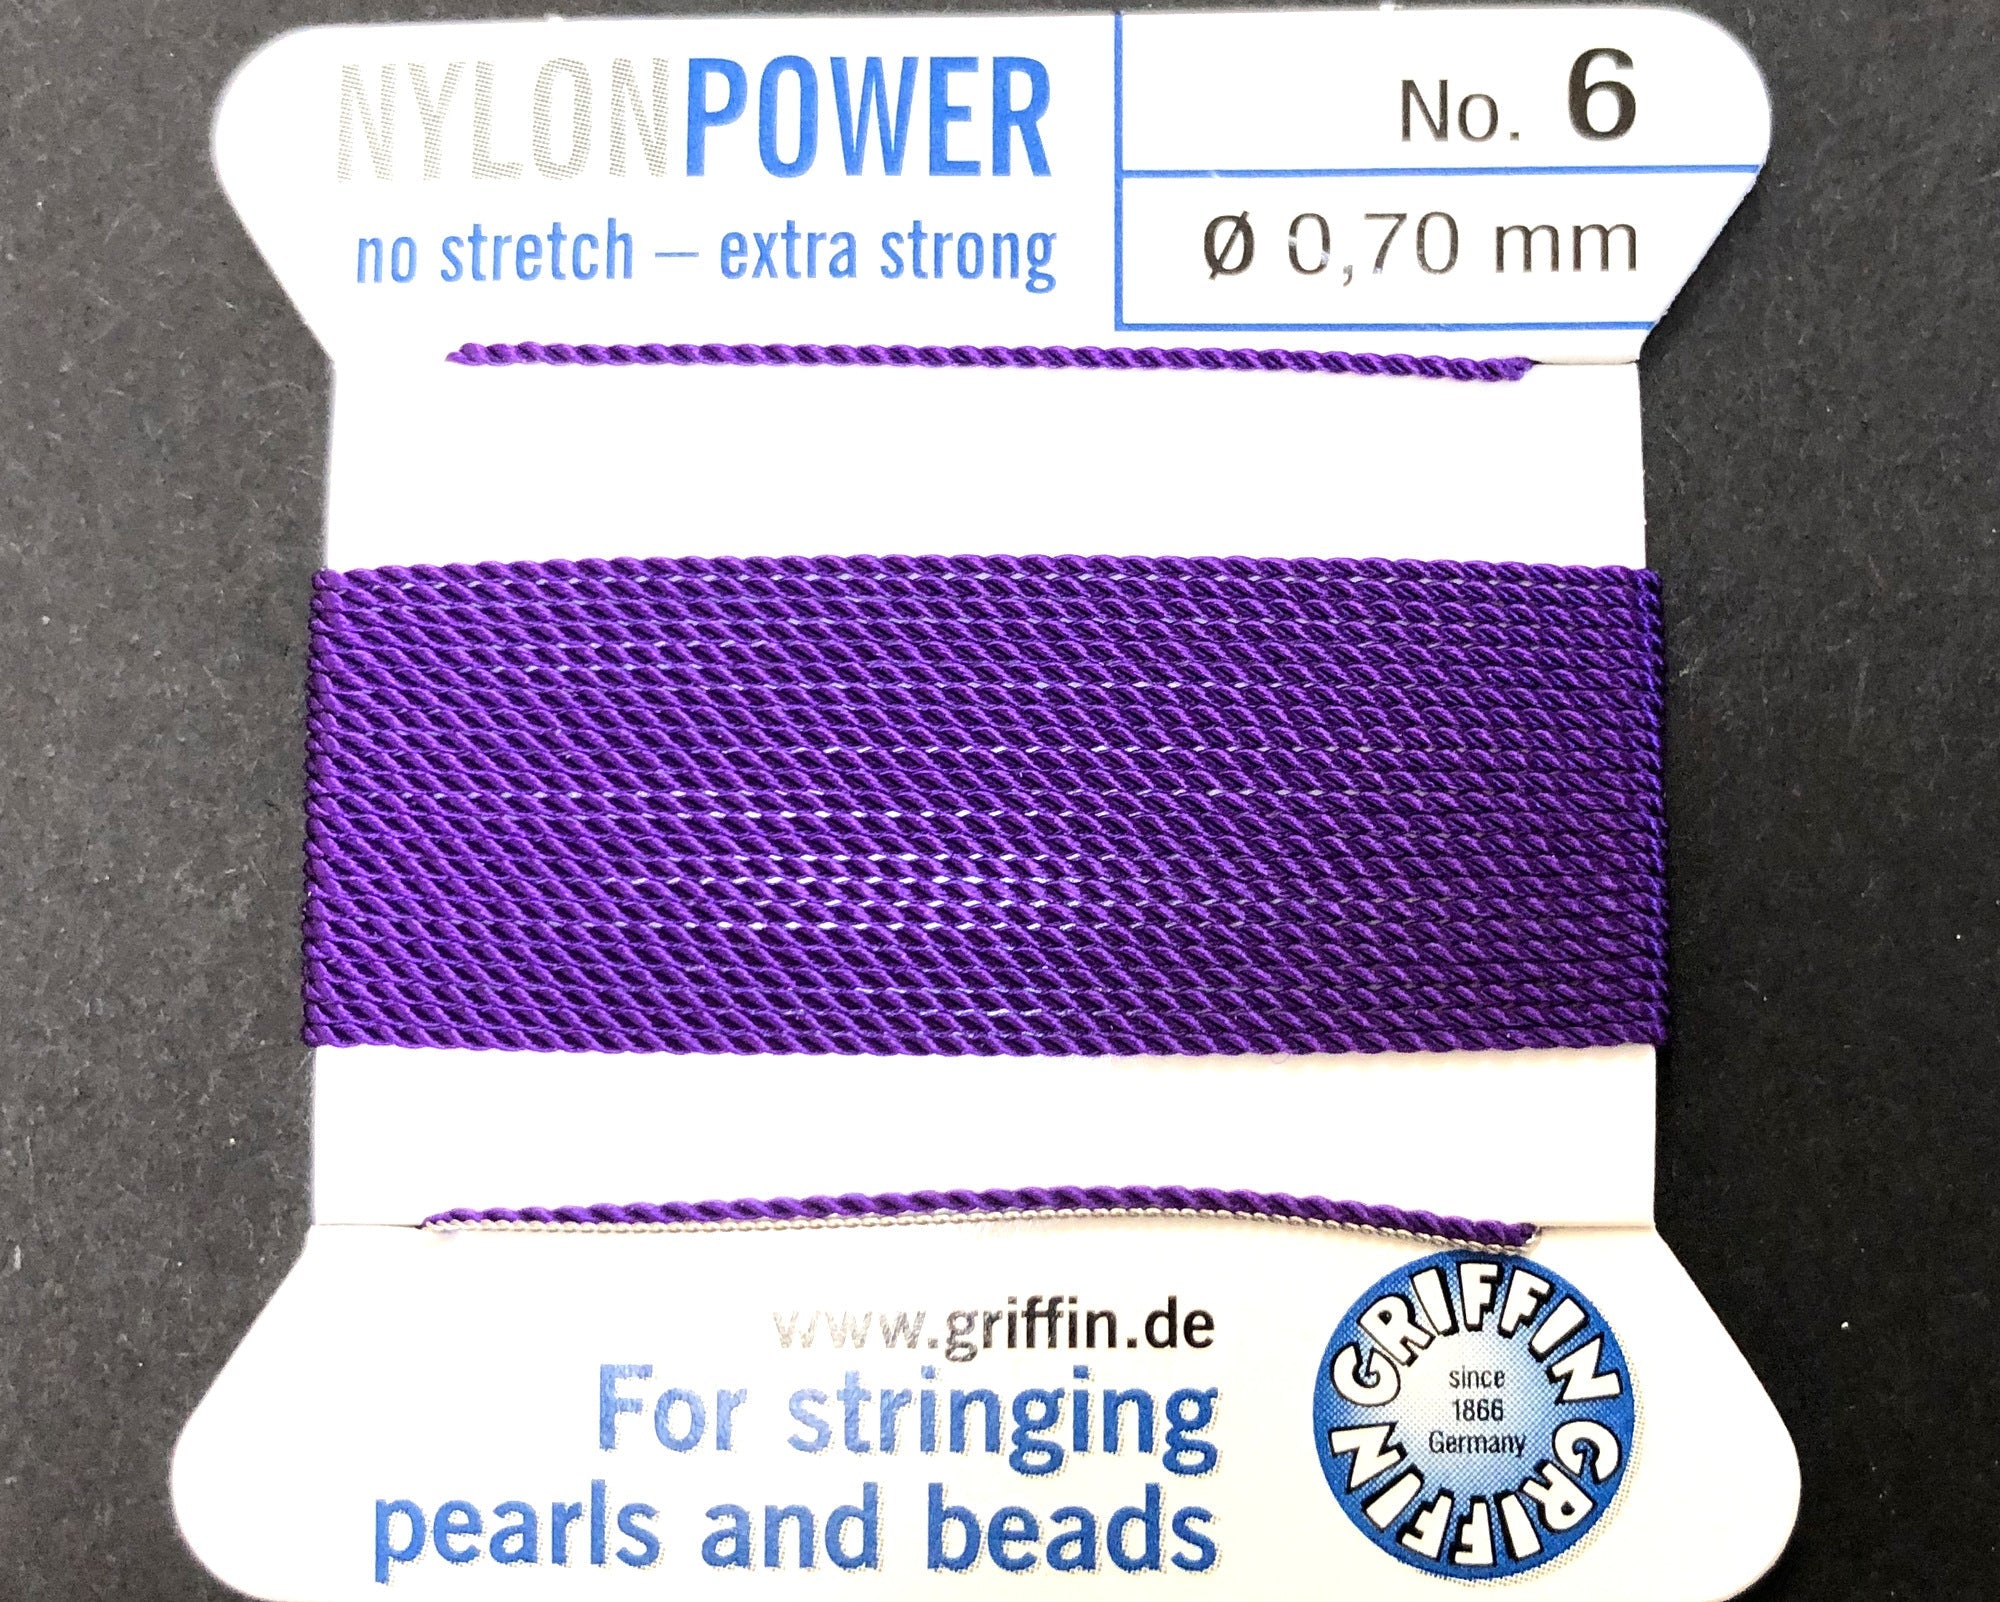 Griffin Nylon Power beading cord with needle, size #6 - 0.70mm, 16 color choice, 2 meter - Oz Beads 